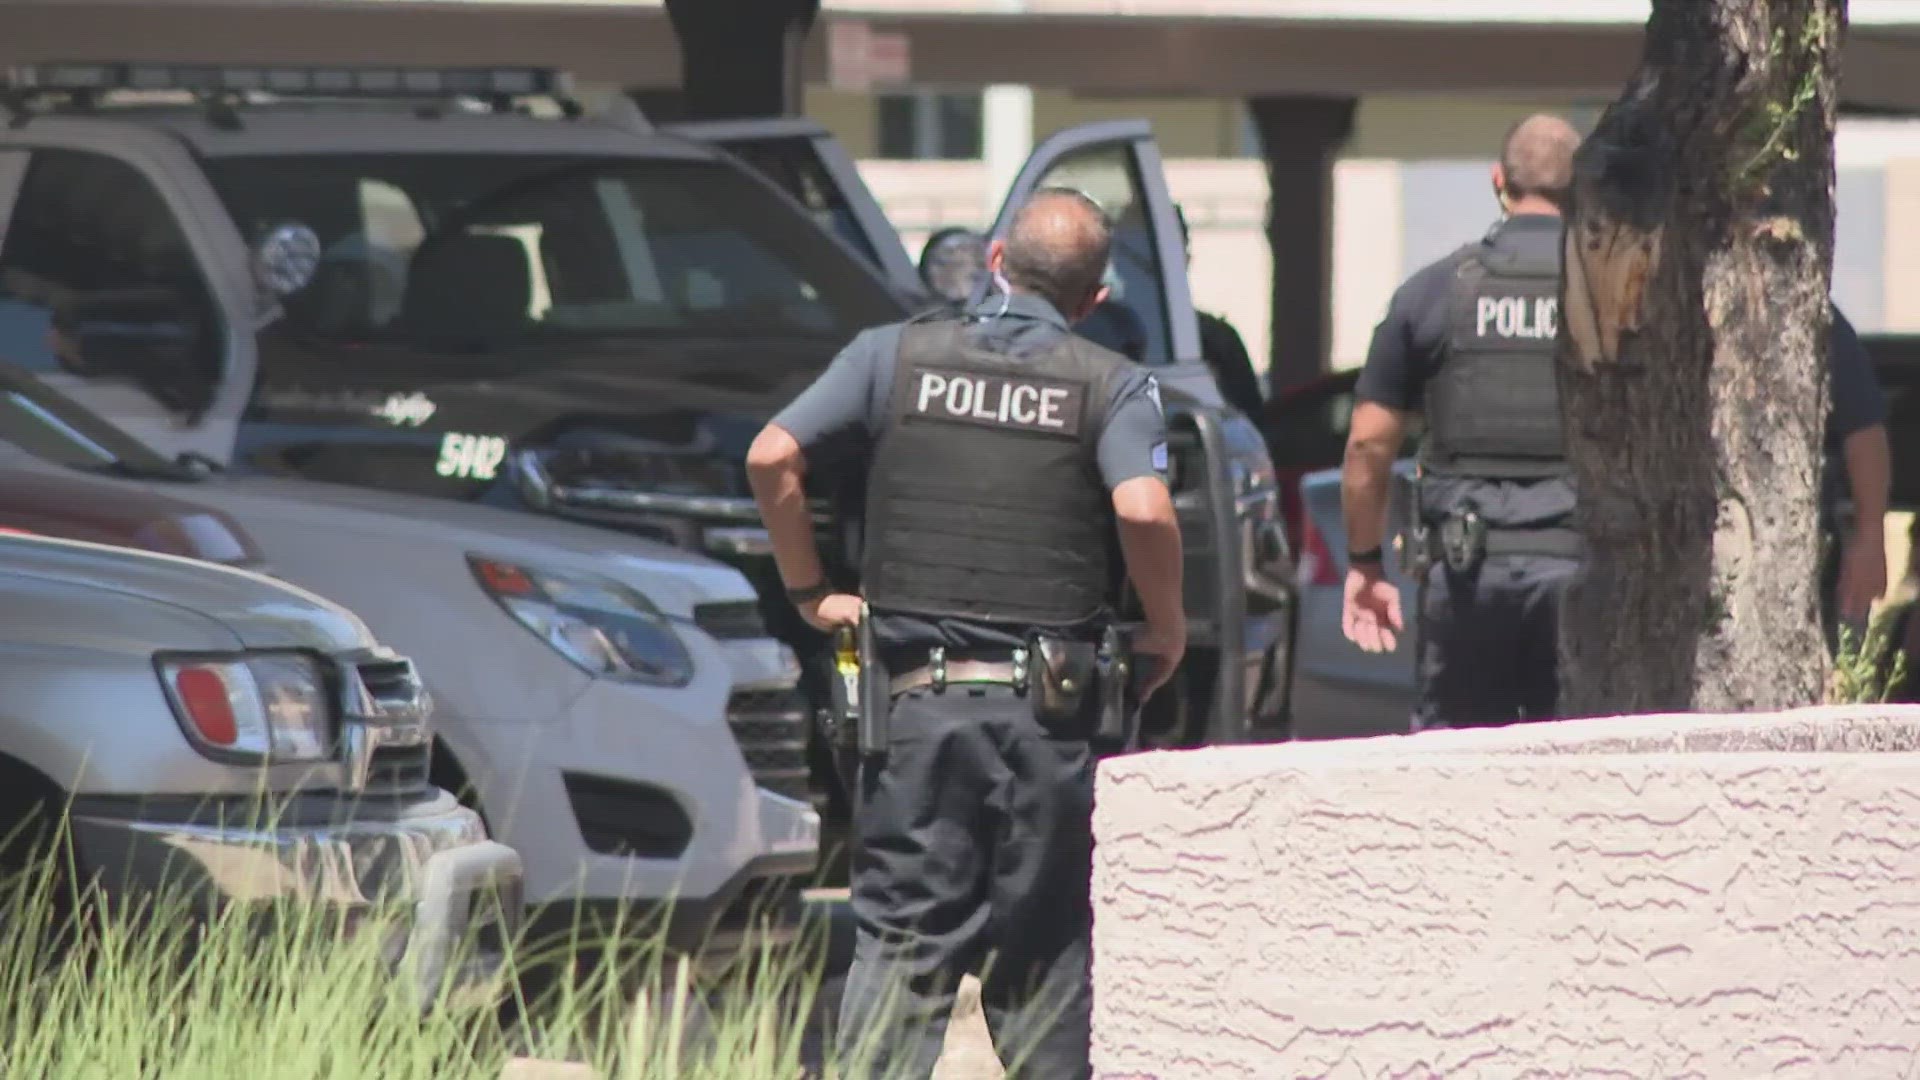 The shooting was reported Tuesday at a residence near Gilbert Road and University Drive in Mesa.